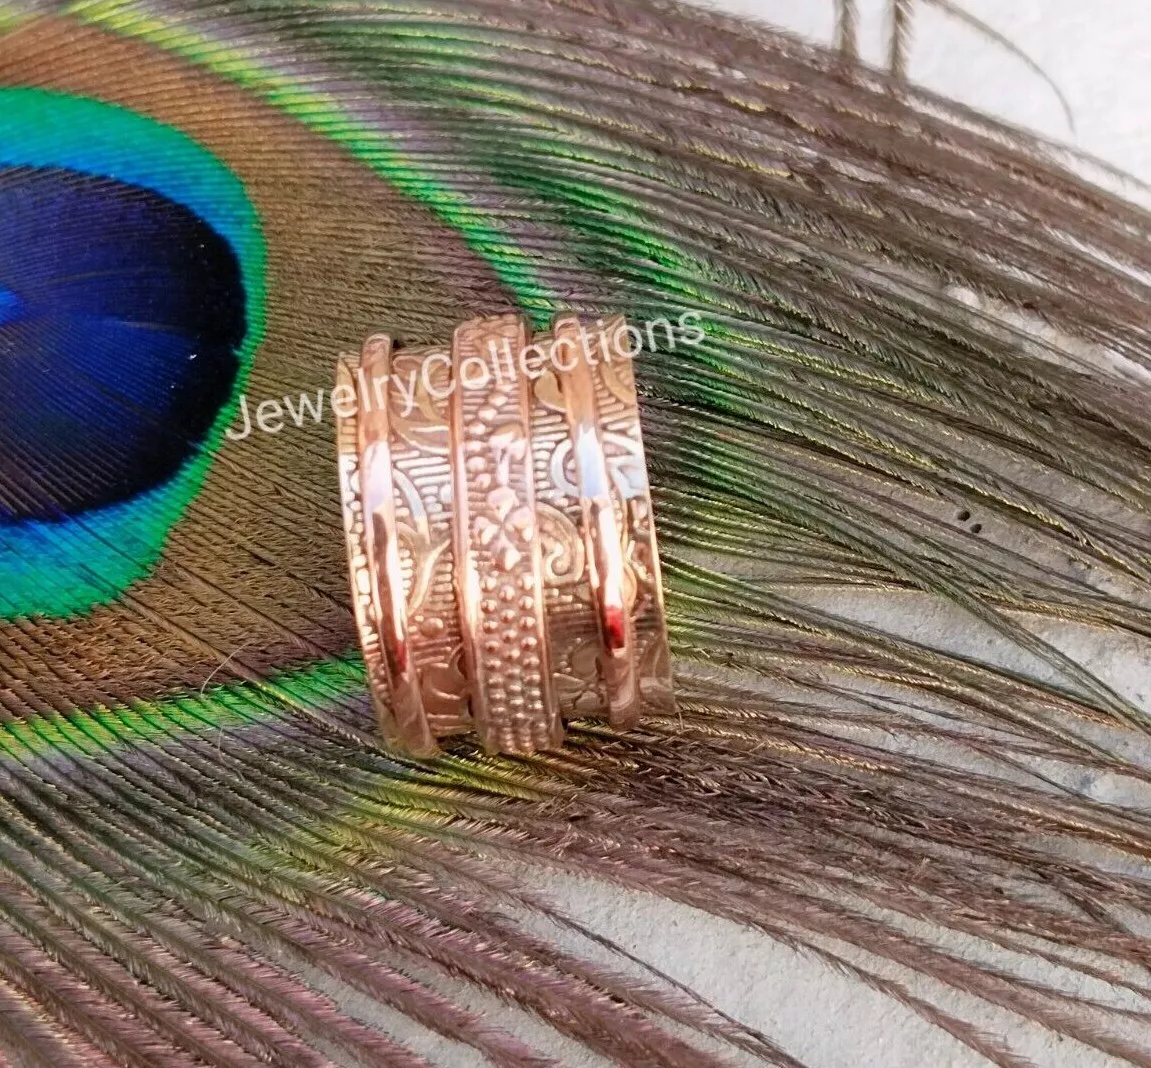 Handmade Collection Copper Rings That Good Stock Photo 2305901967 |  Shutterstock